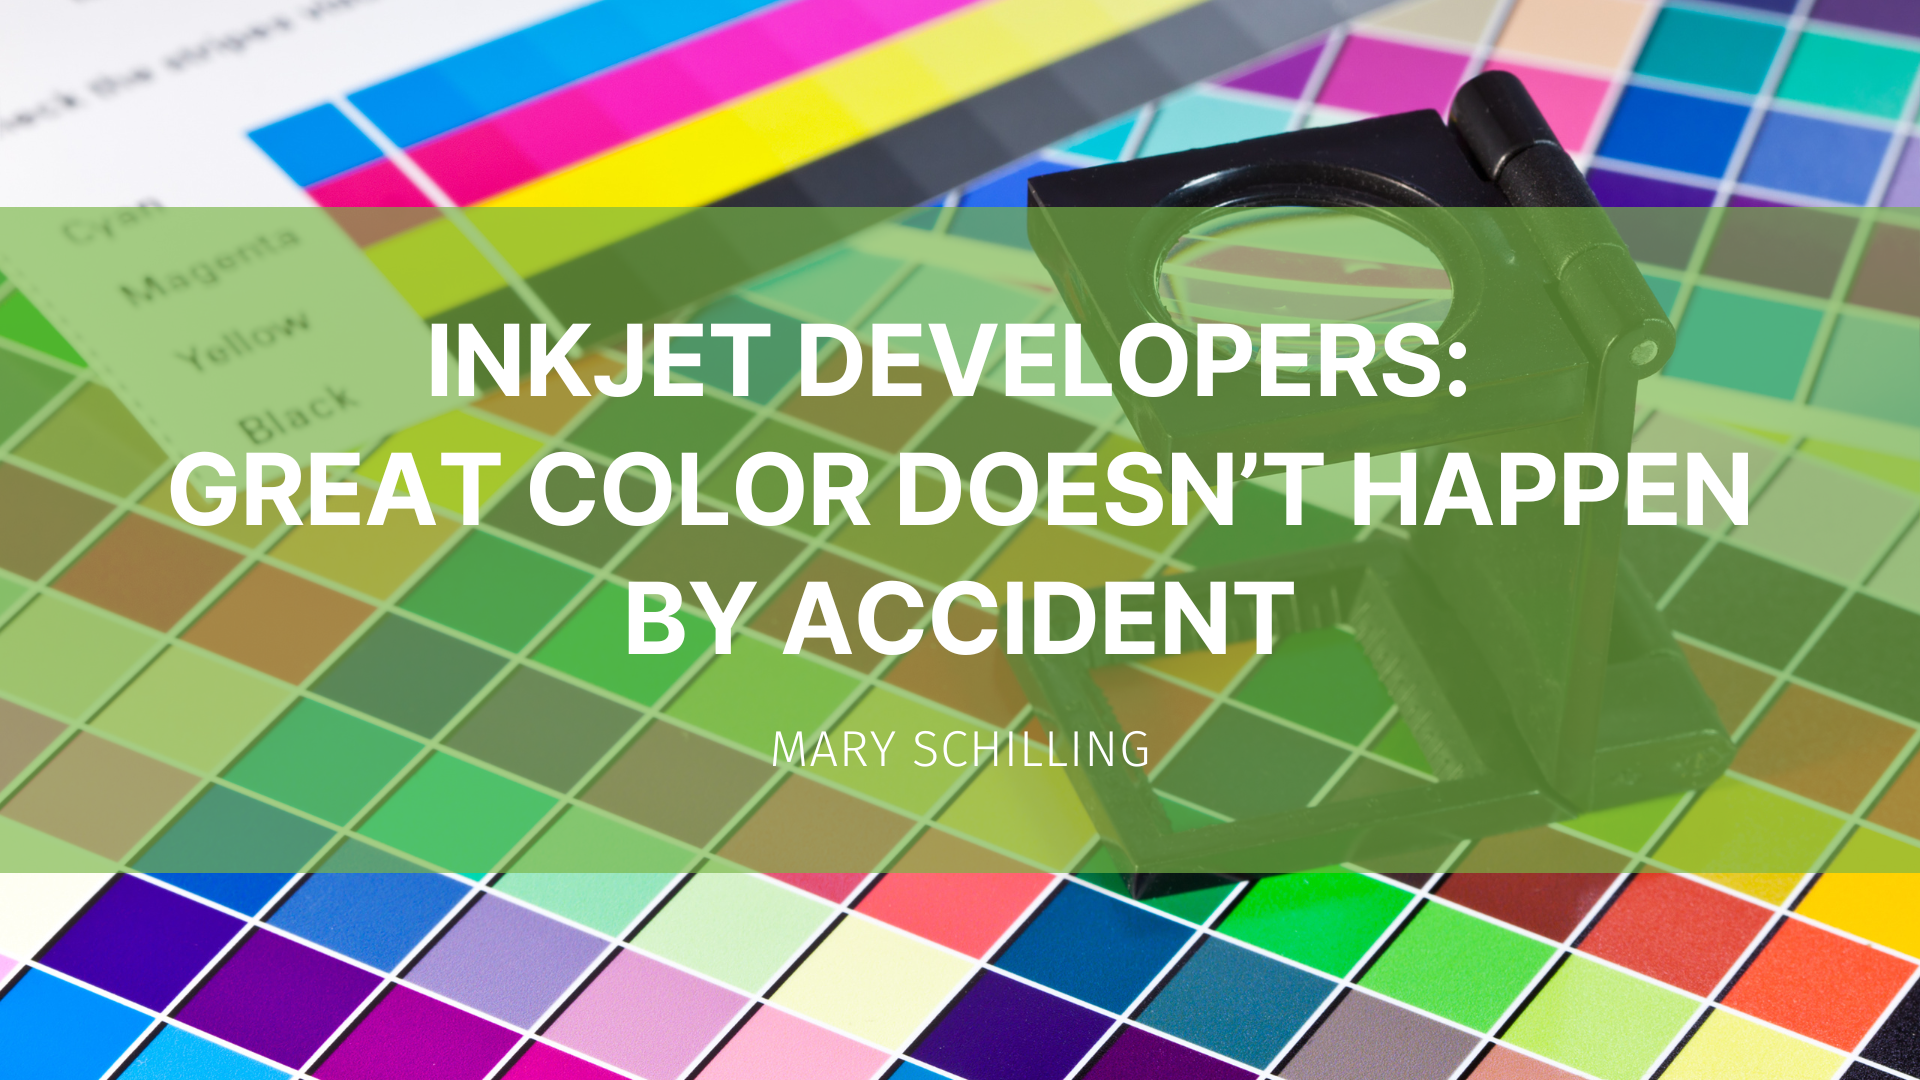 Featured image for “Inkjet Developers: Great color doesn’t happen by accident!”